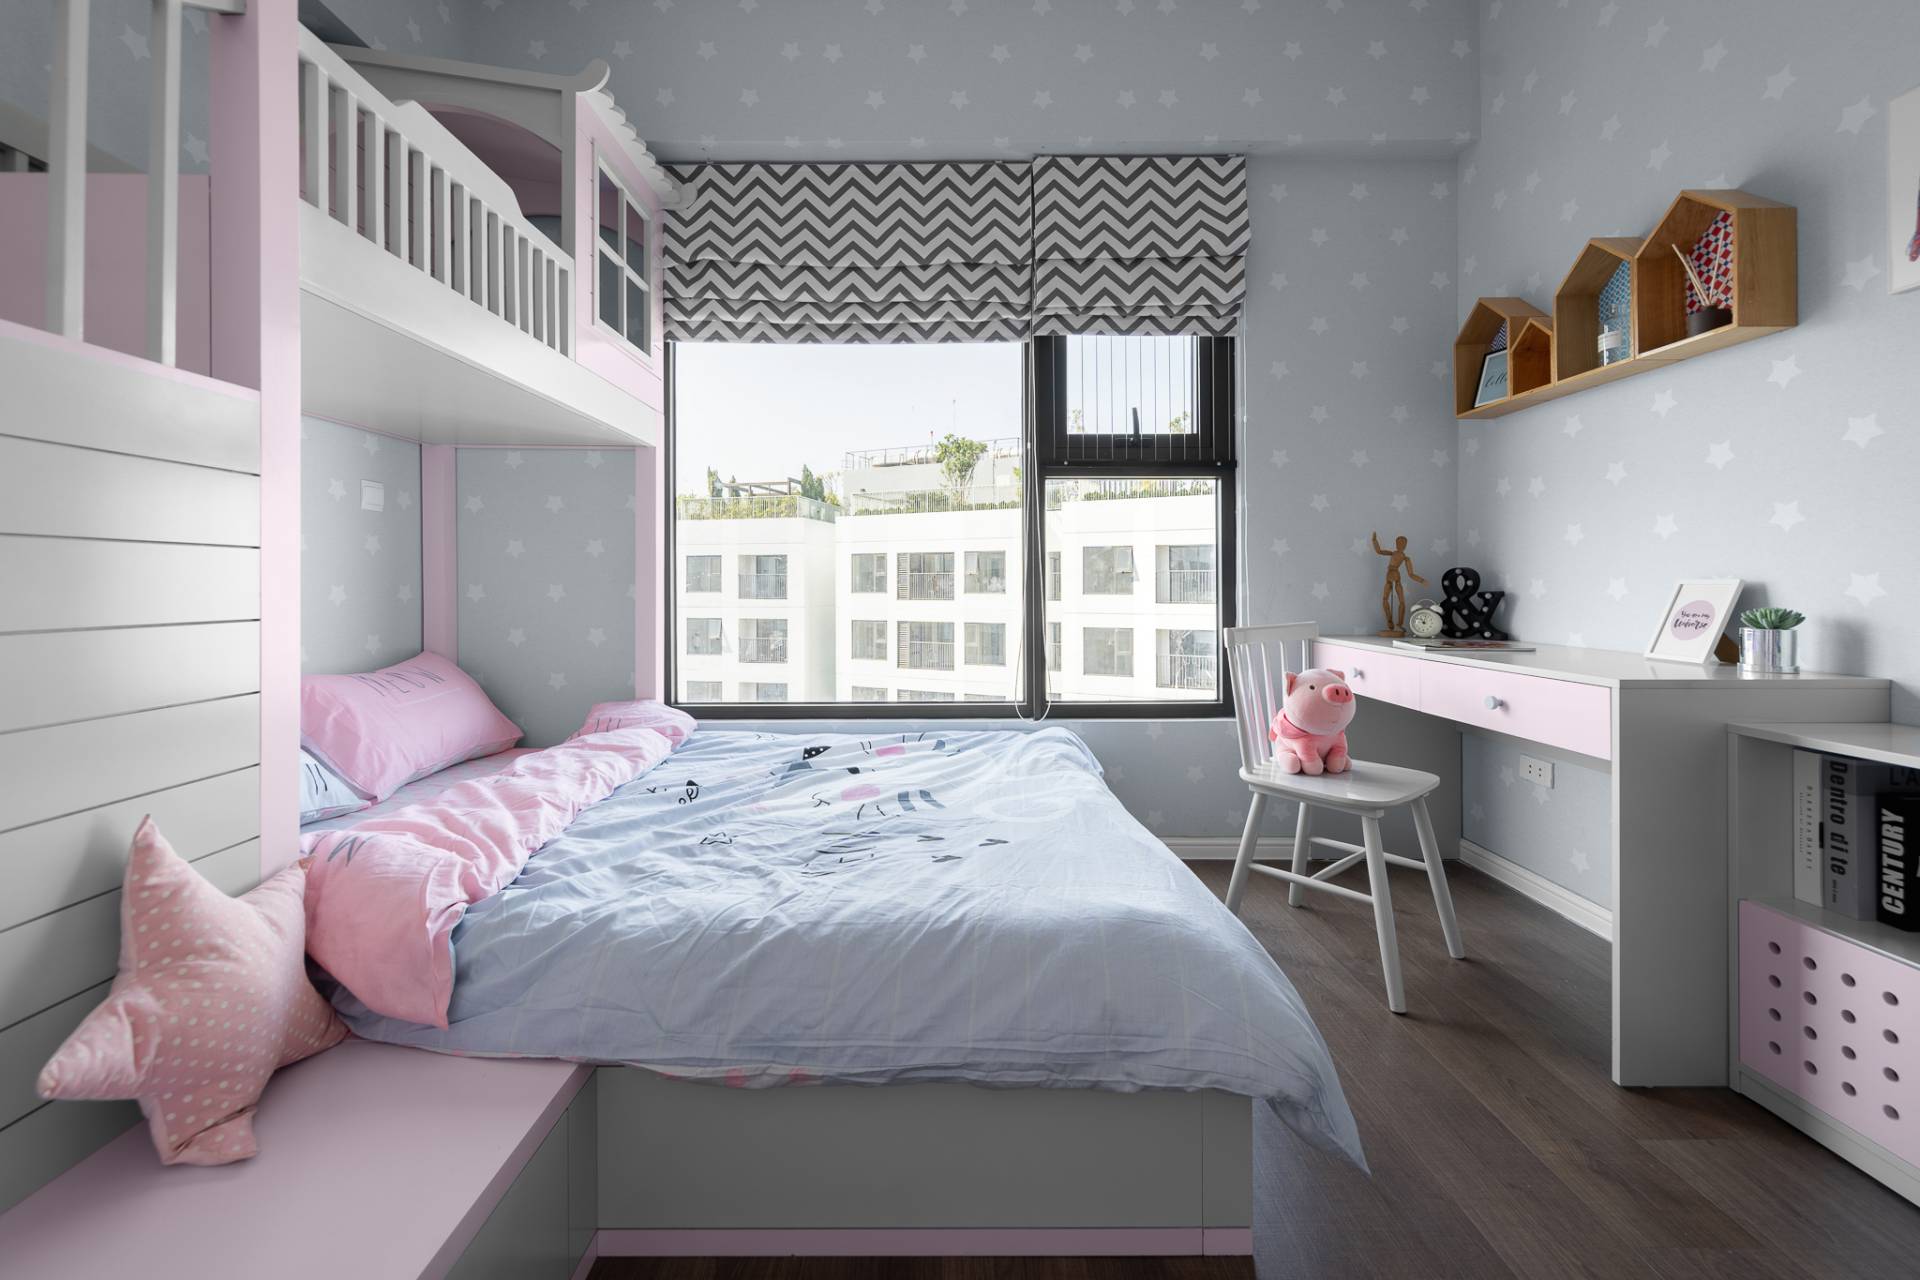 Large and airy space, filled with natural light for children’s best development.